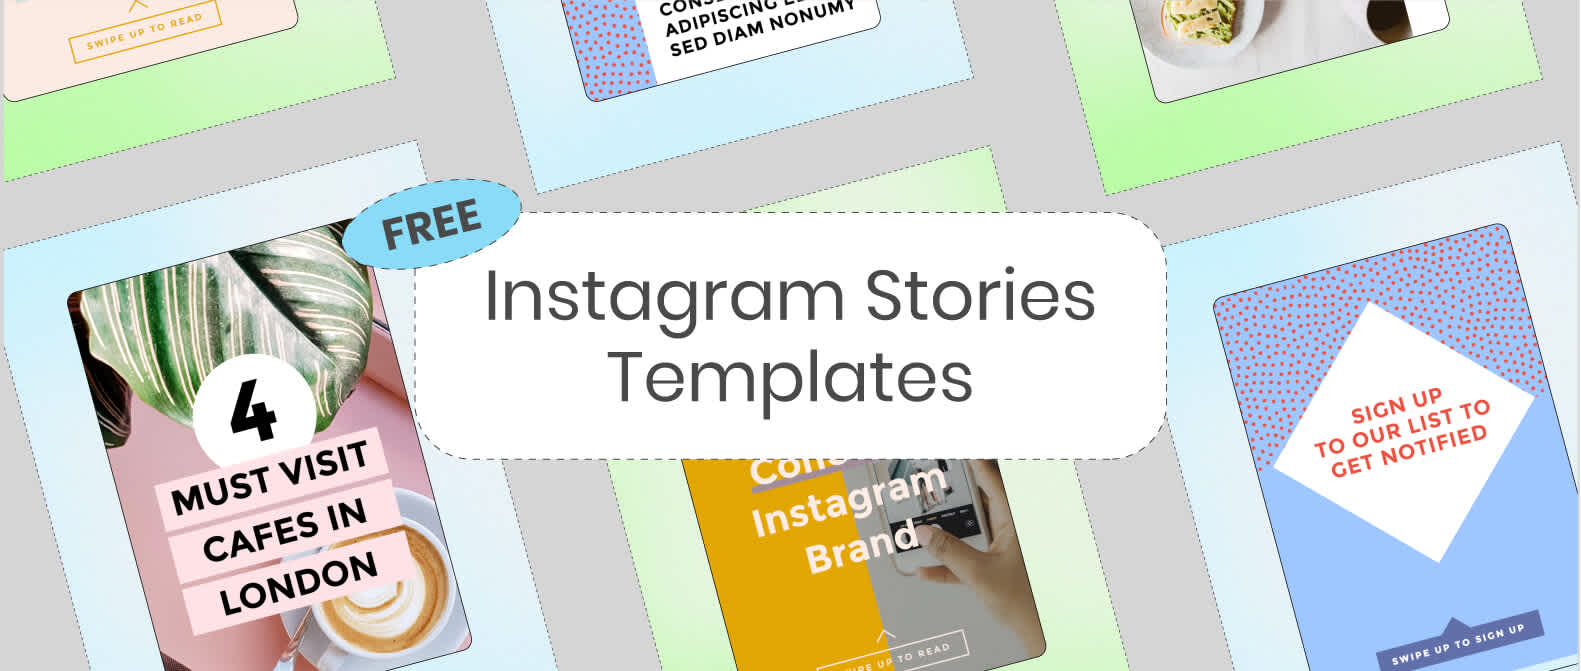 Header image reading Free Instagram Stories Templates with collage of IG stories in background